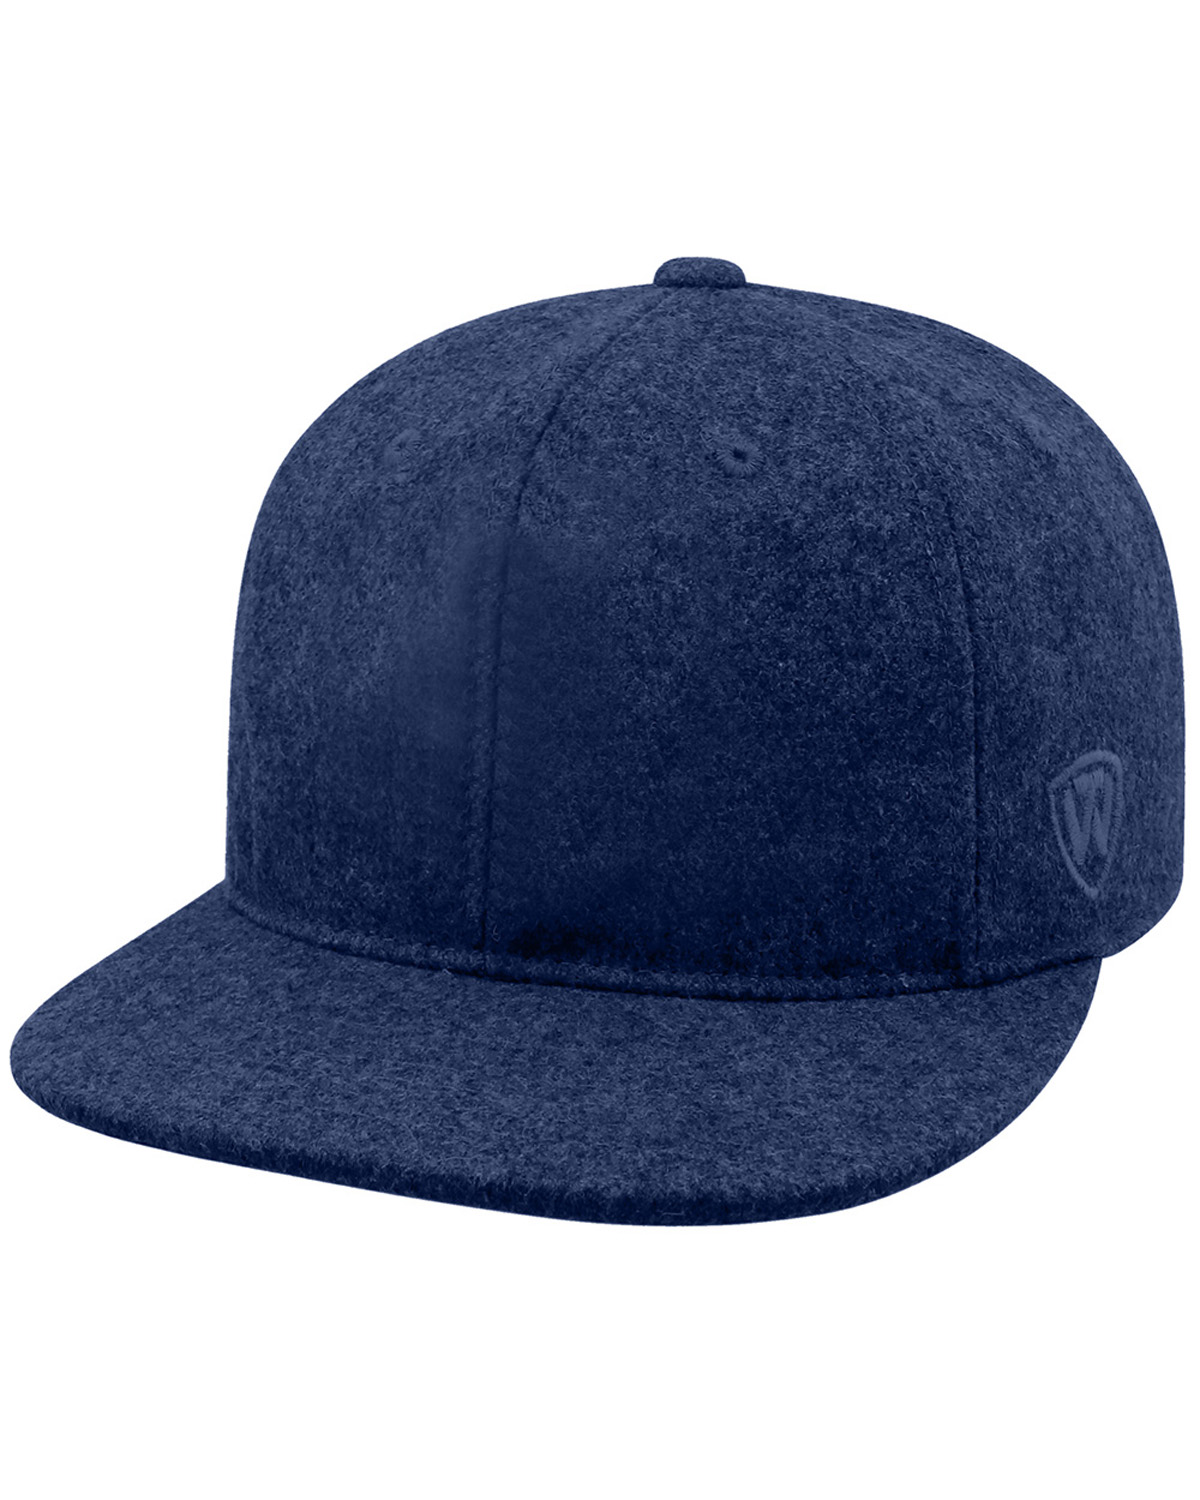 'Top Of The World TW5515 Adult Natural Cap'